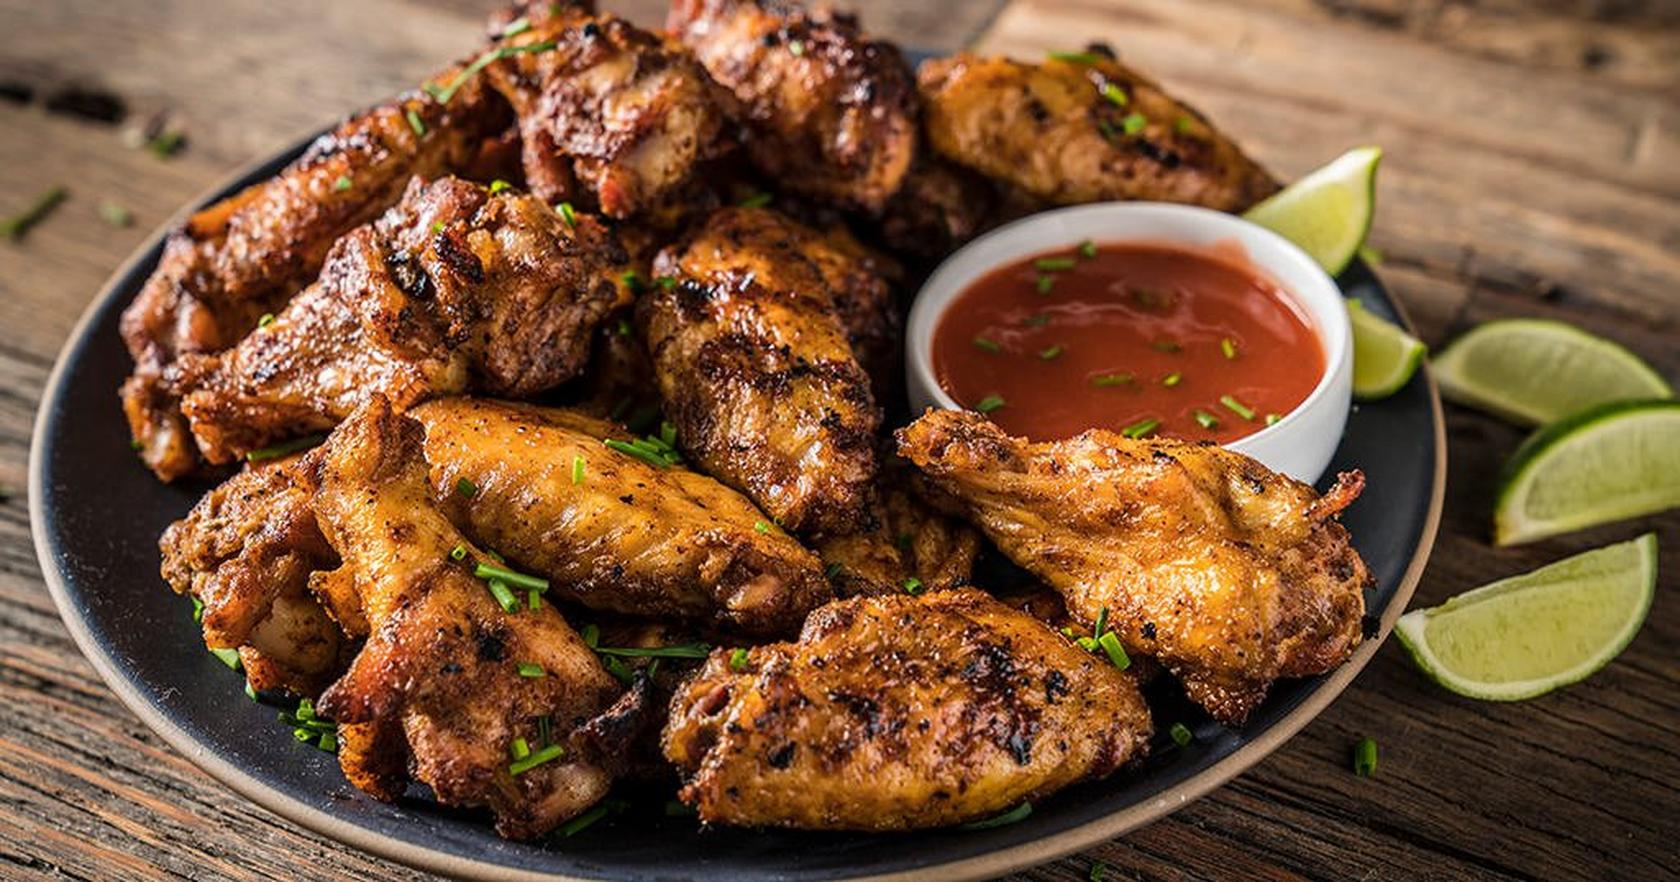 Roasted Tequila-Lime Wings by Amanda Haas